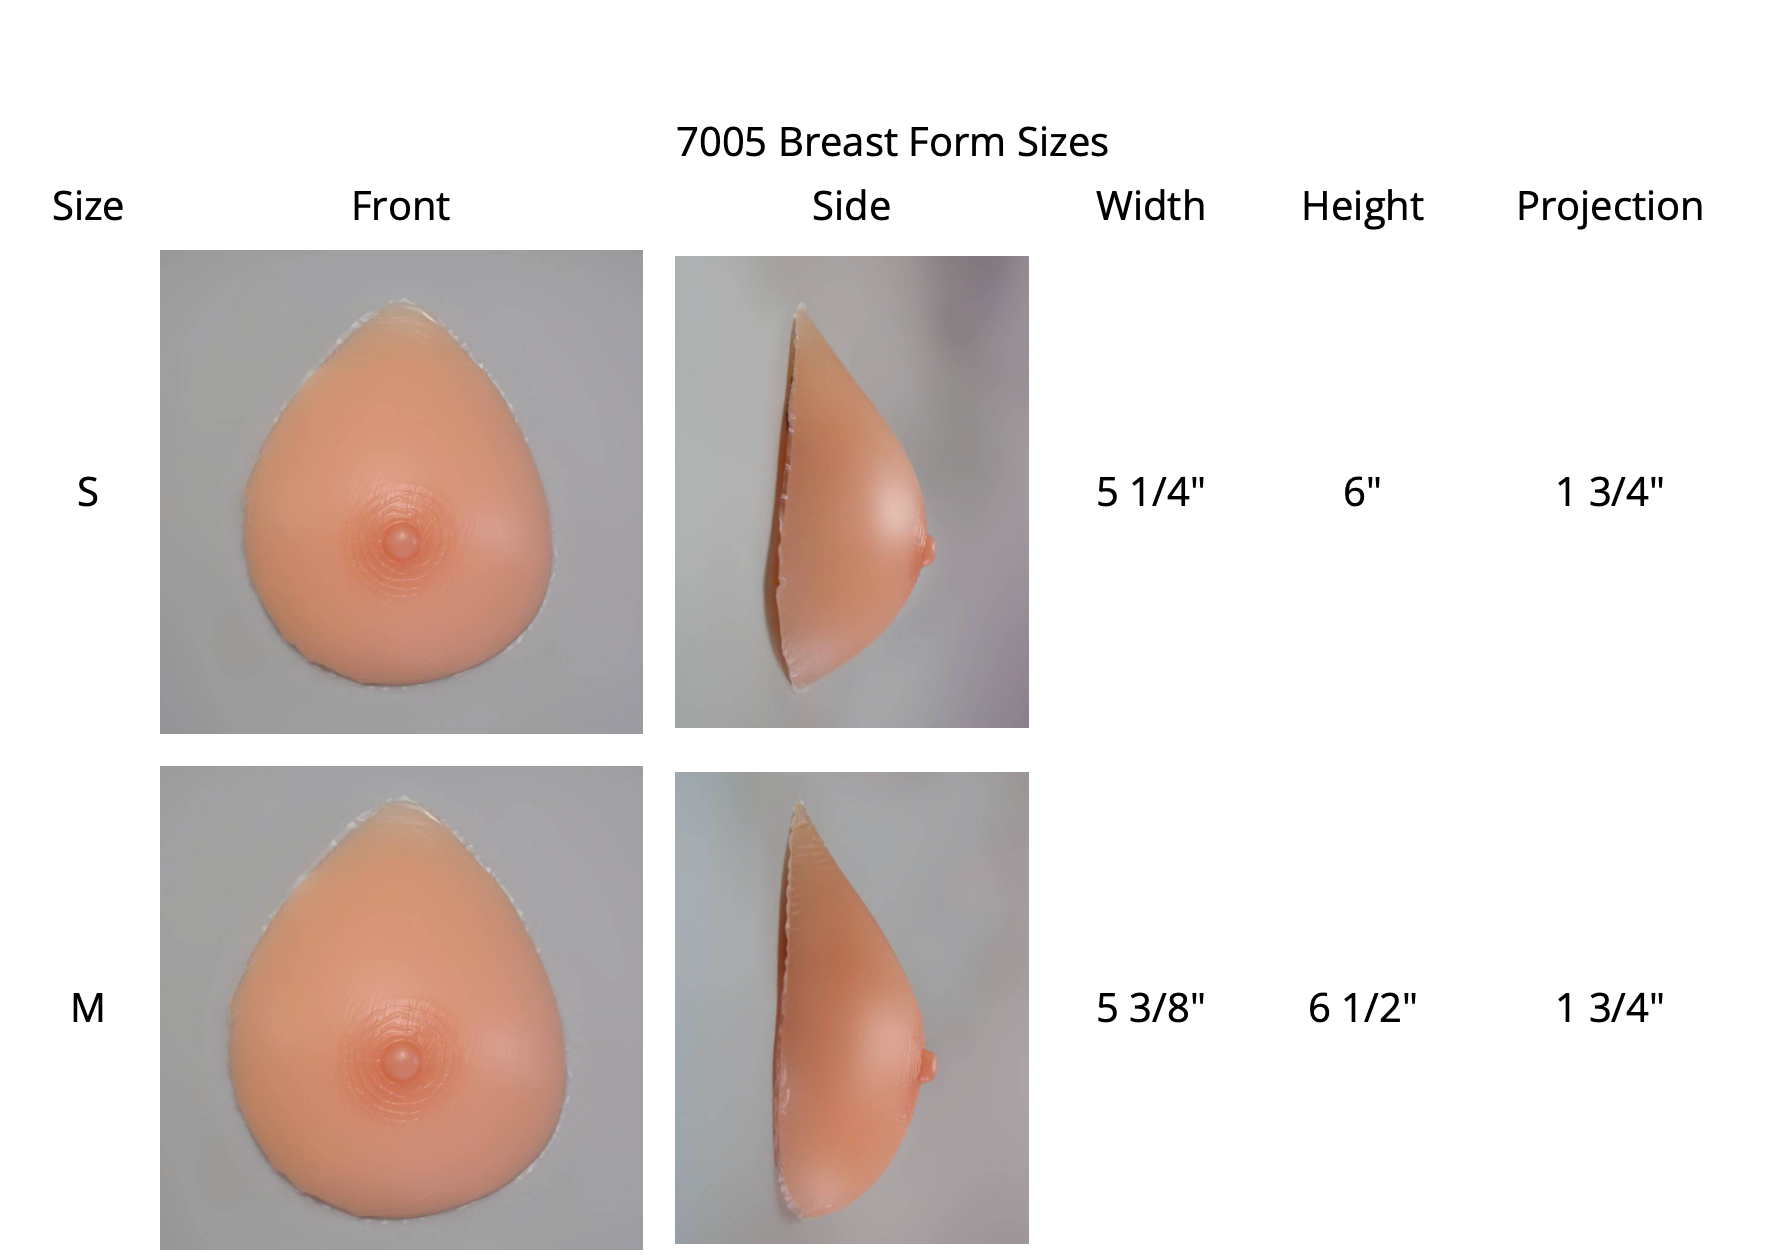 Premium Projected DDD Oval Silicone Breast Forms